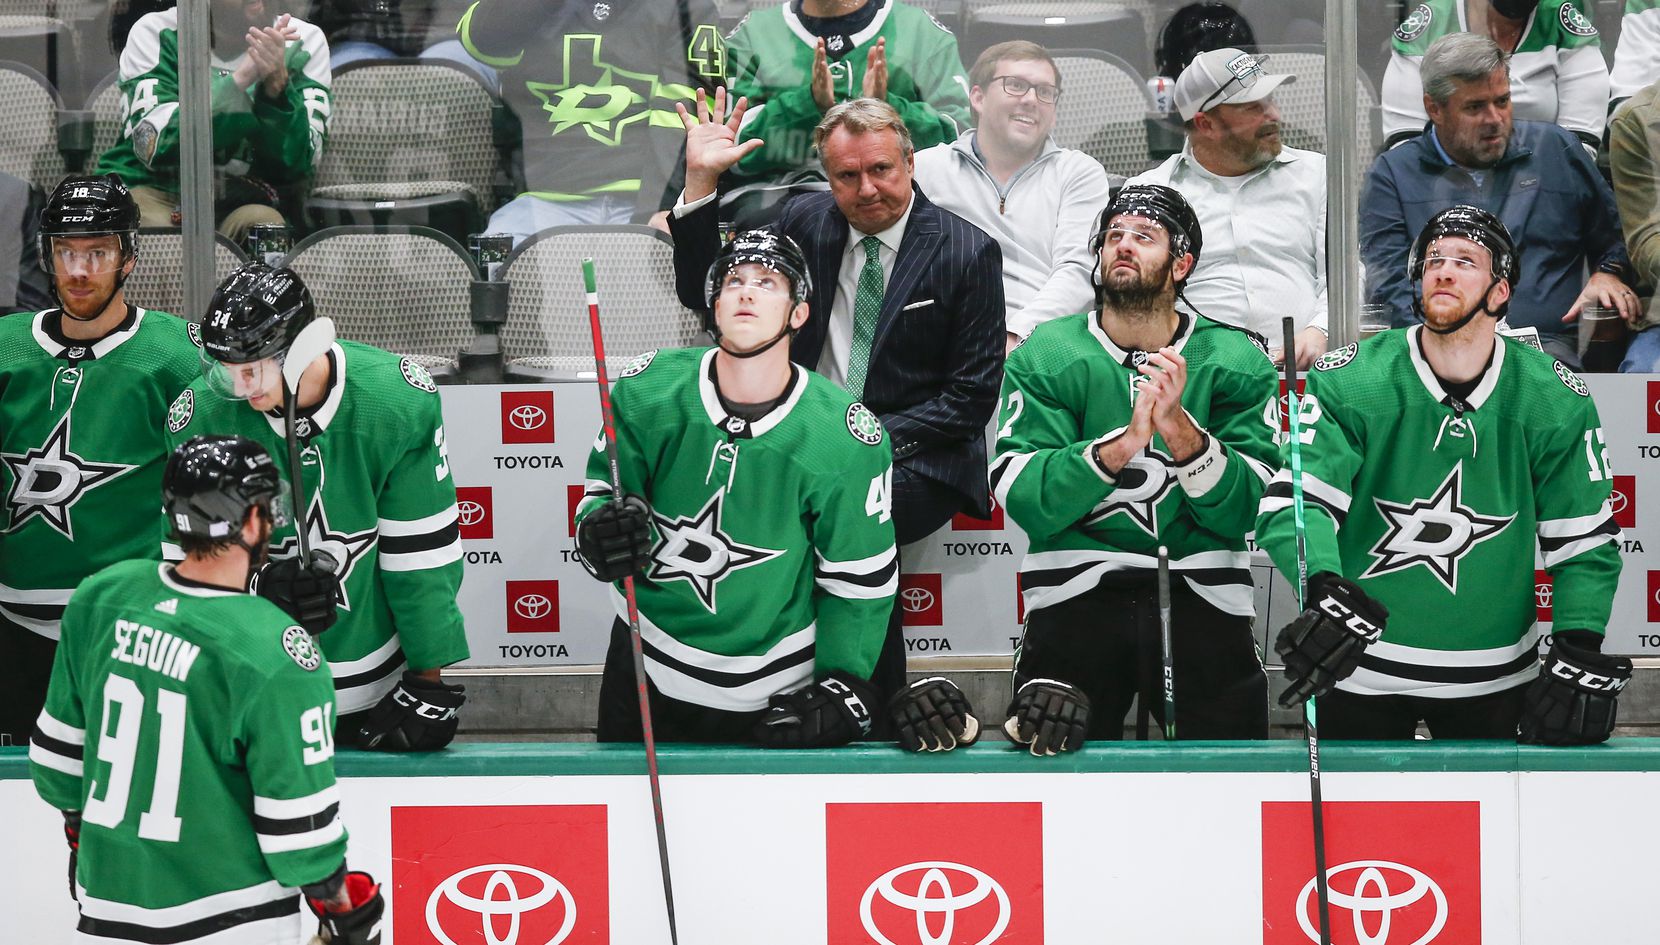 Dallas Stars head coach Rick Bowness acknowledges fans after it was announced that it was his 2,500th career game as head or assistant coach in the NHL during the first period of a hockey game against the Carolina Hurricanes in Dallas, Tuesday, November 30, 2021. (Brandon Wade/Special Contributor)